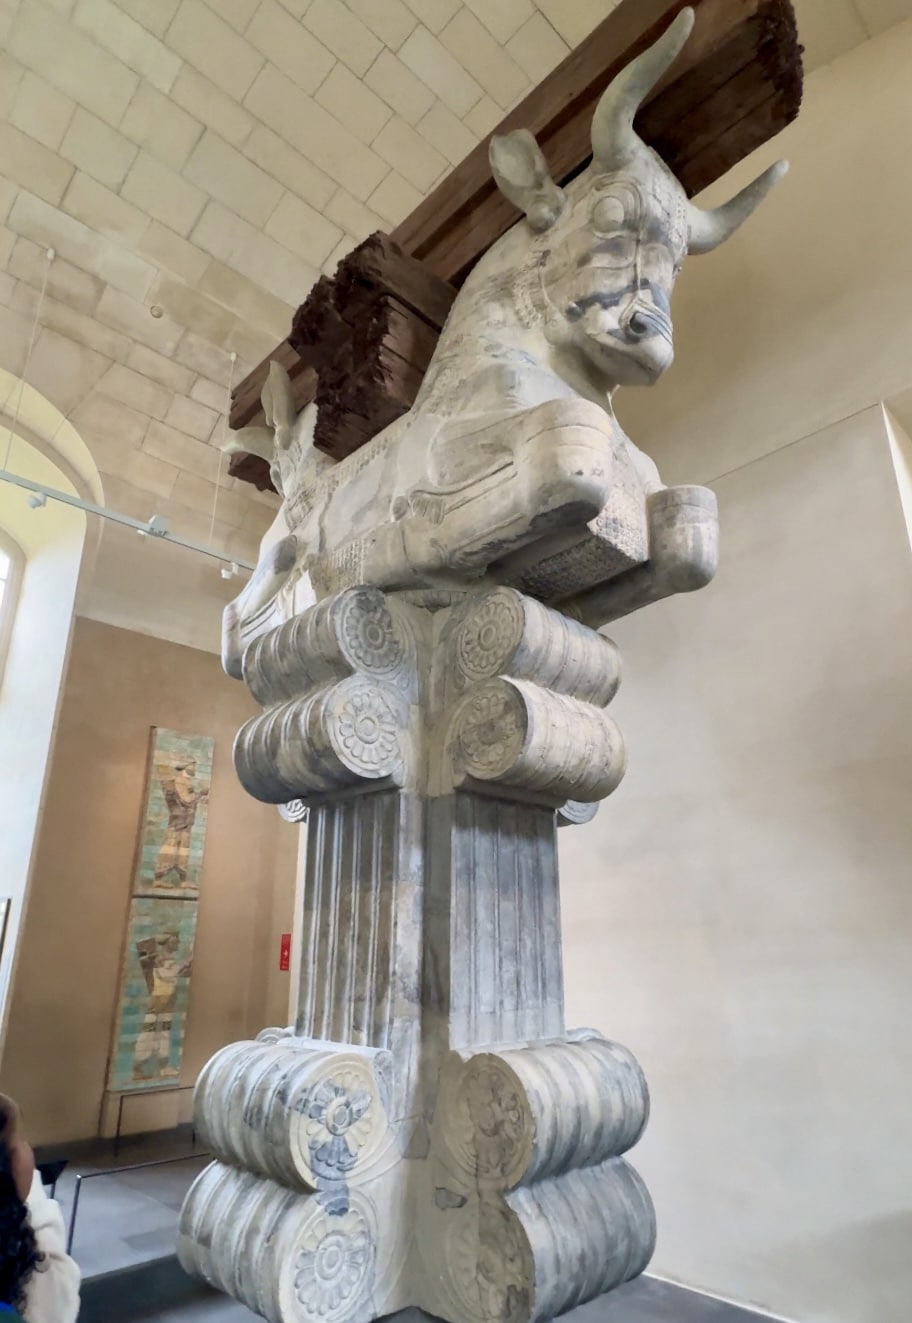 A large stone column capital featuring two bull figures back to back, displayed in a museum setting with a high vaulted ceiling—an architectural marvel you'll only encounter one day in Paris.